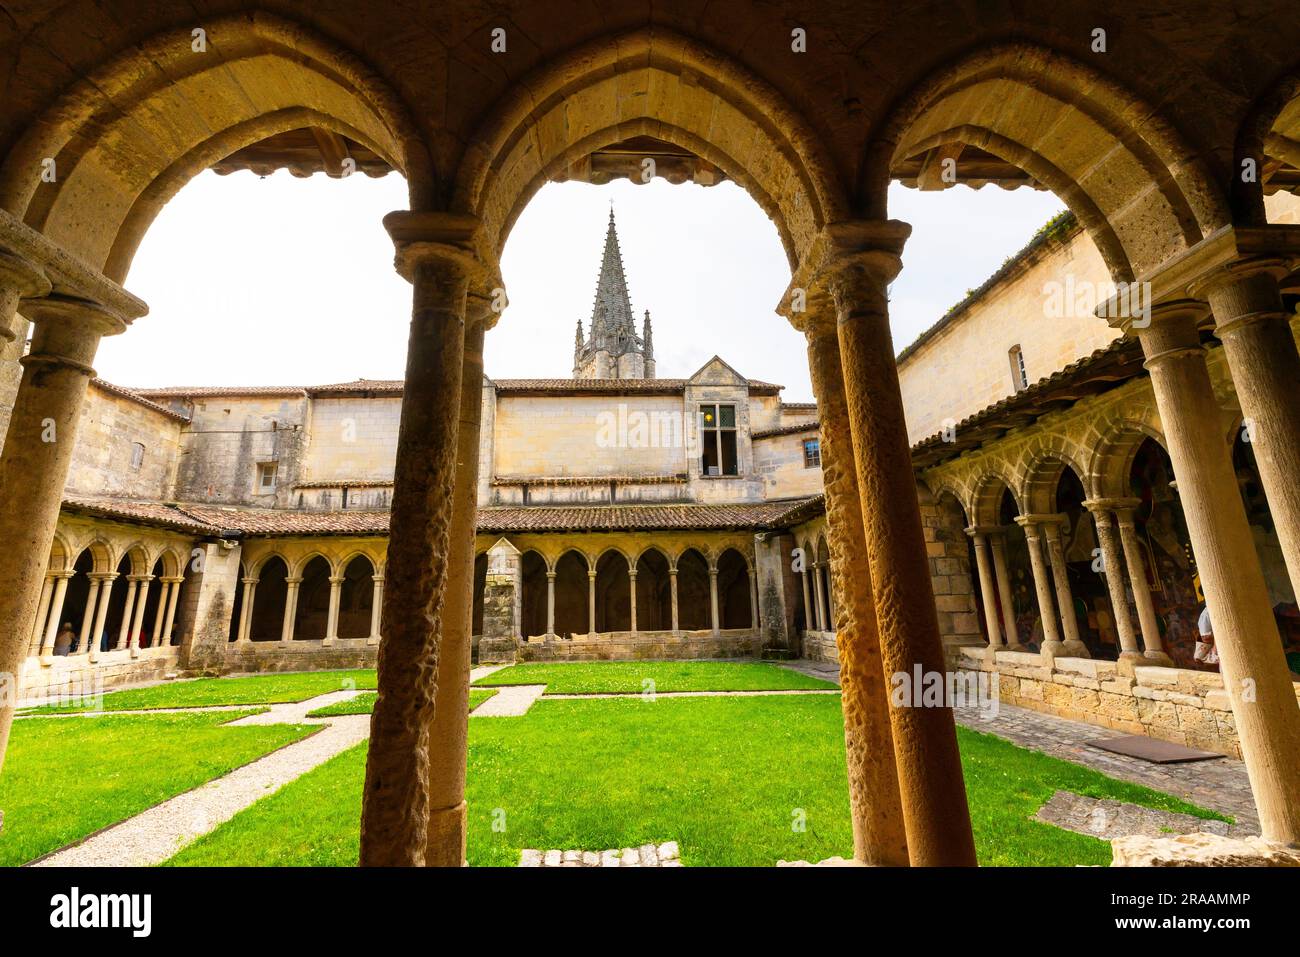 Cloister with double arched columns in medieval Collegiate Church of Saint-Emilion. The Saint-Emilion, village of great importance is located nearby B Stock Photo